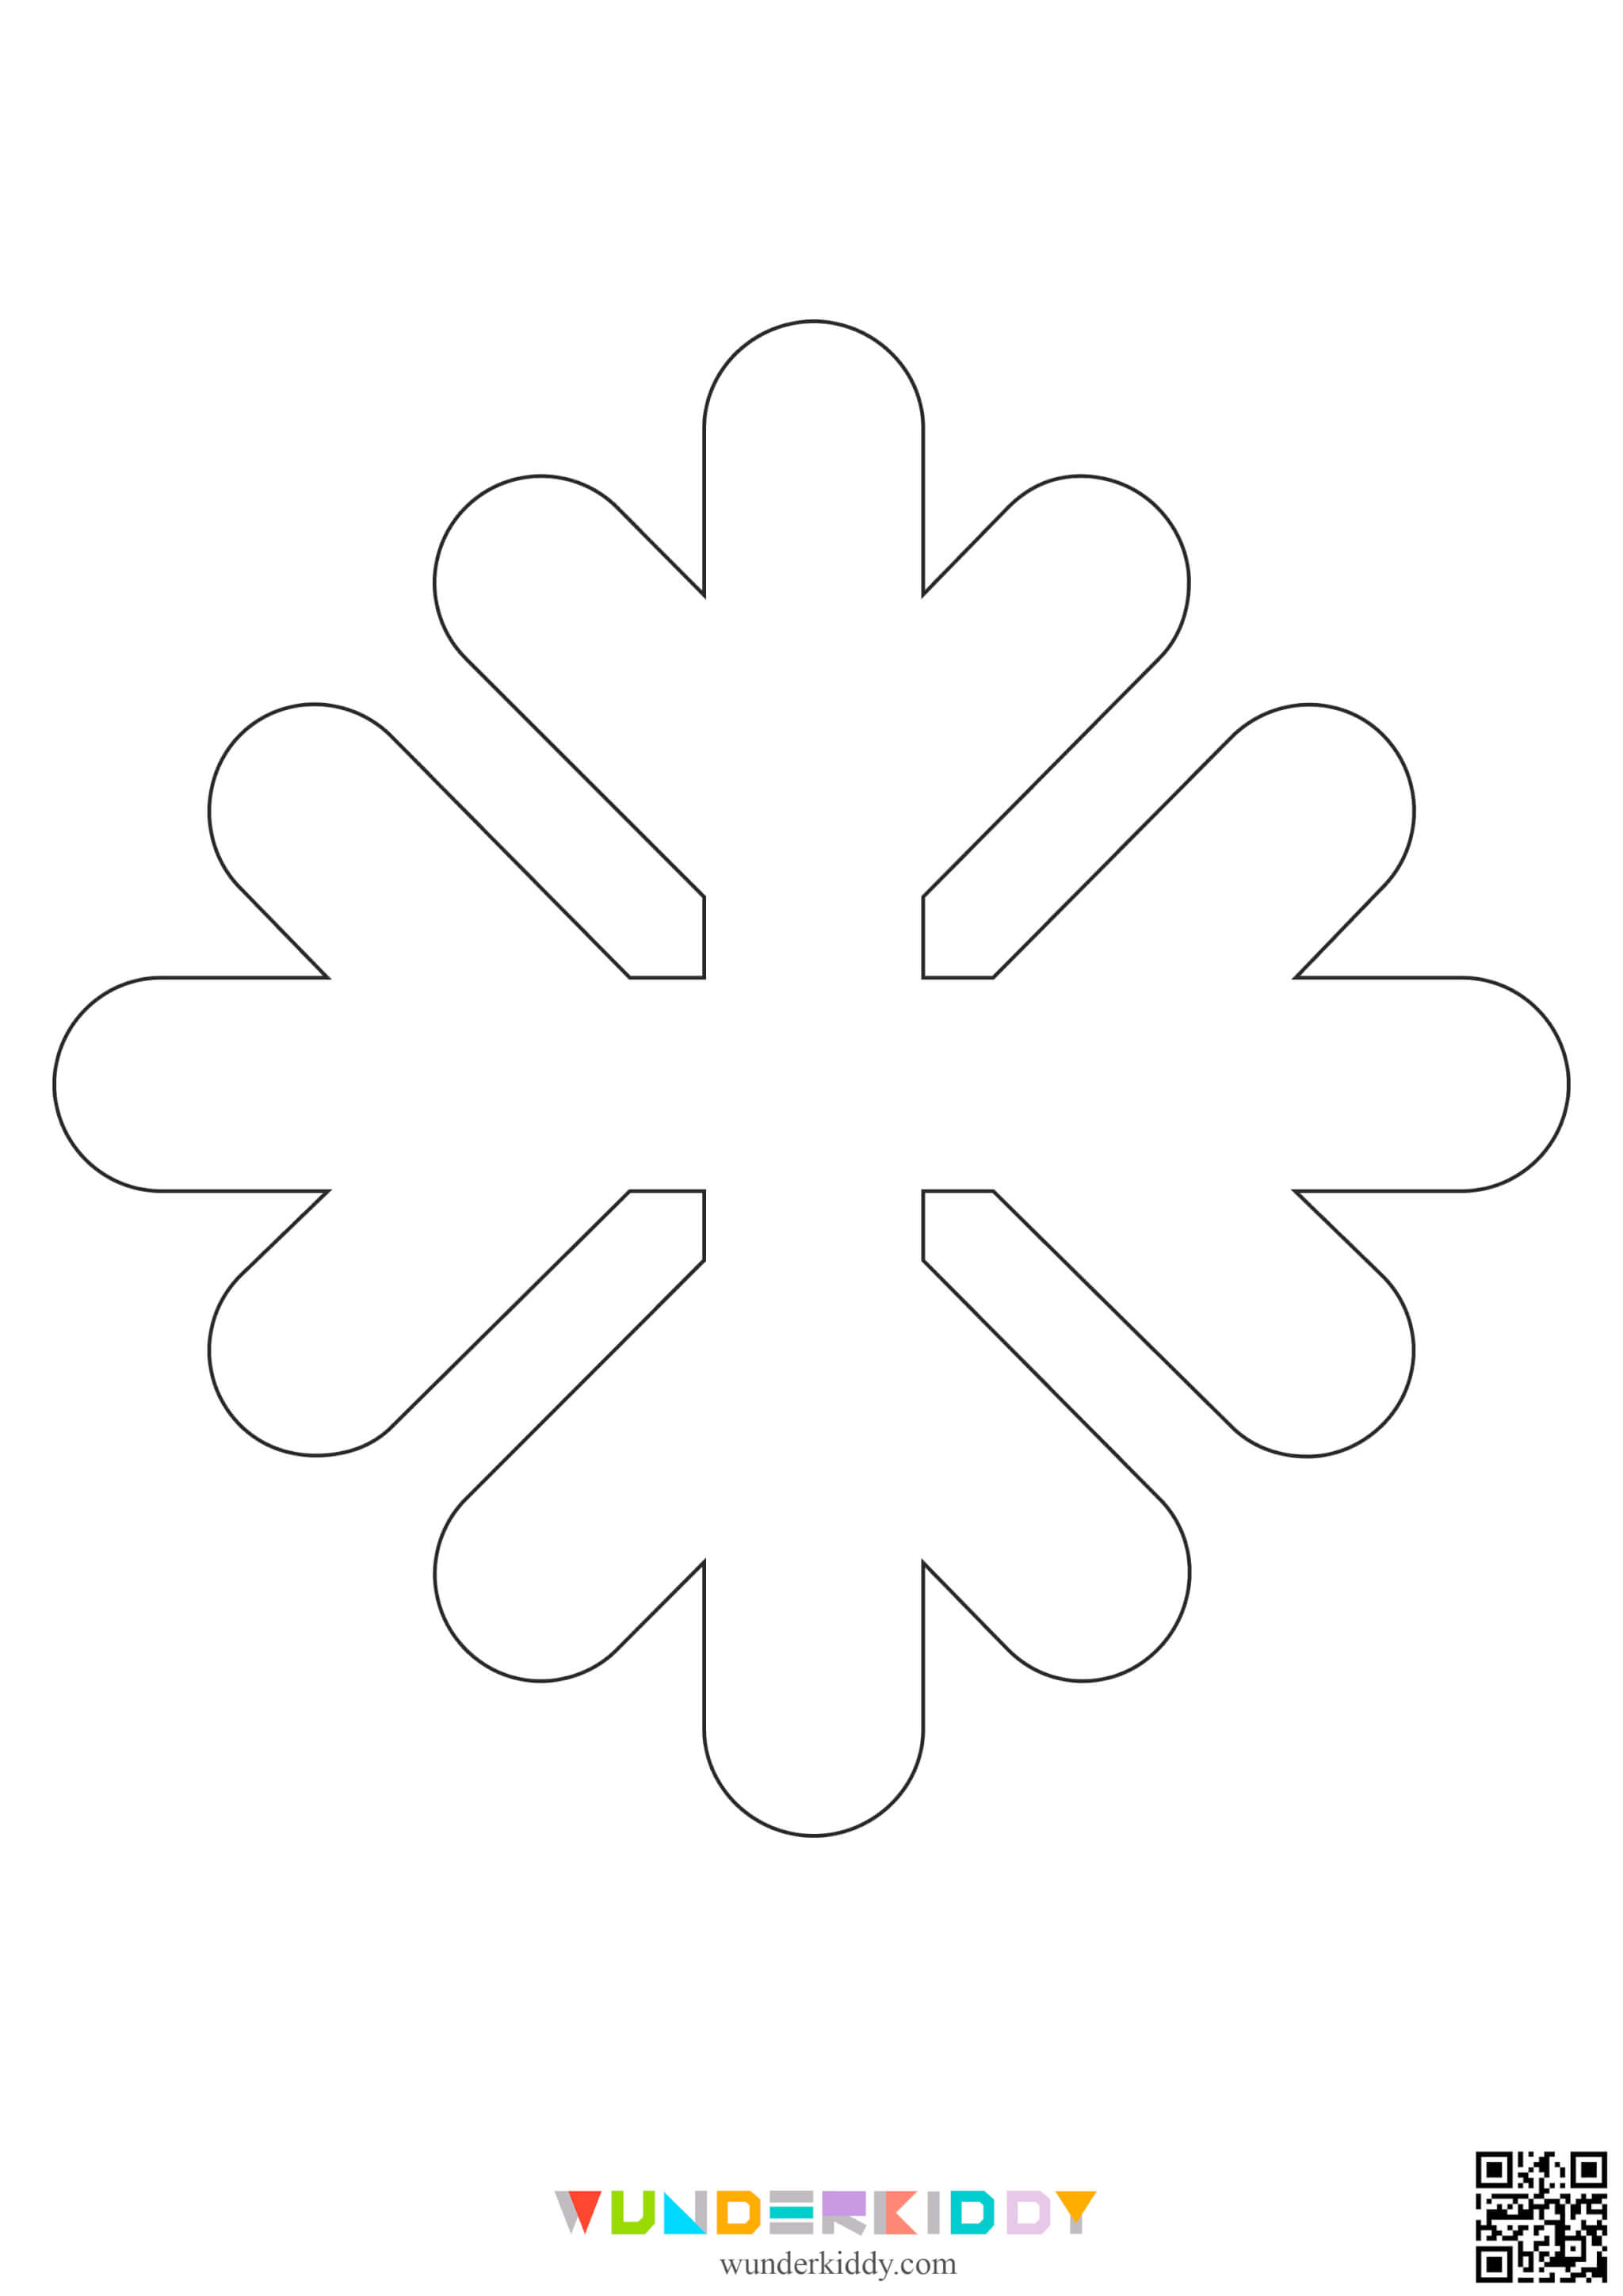 Snowflakes Template - Image 7